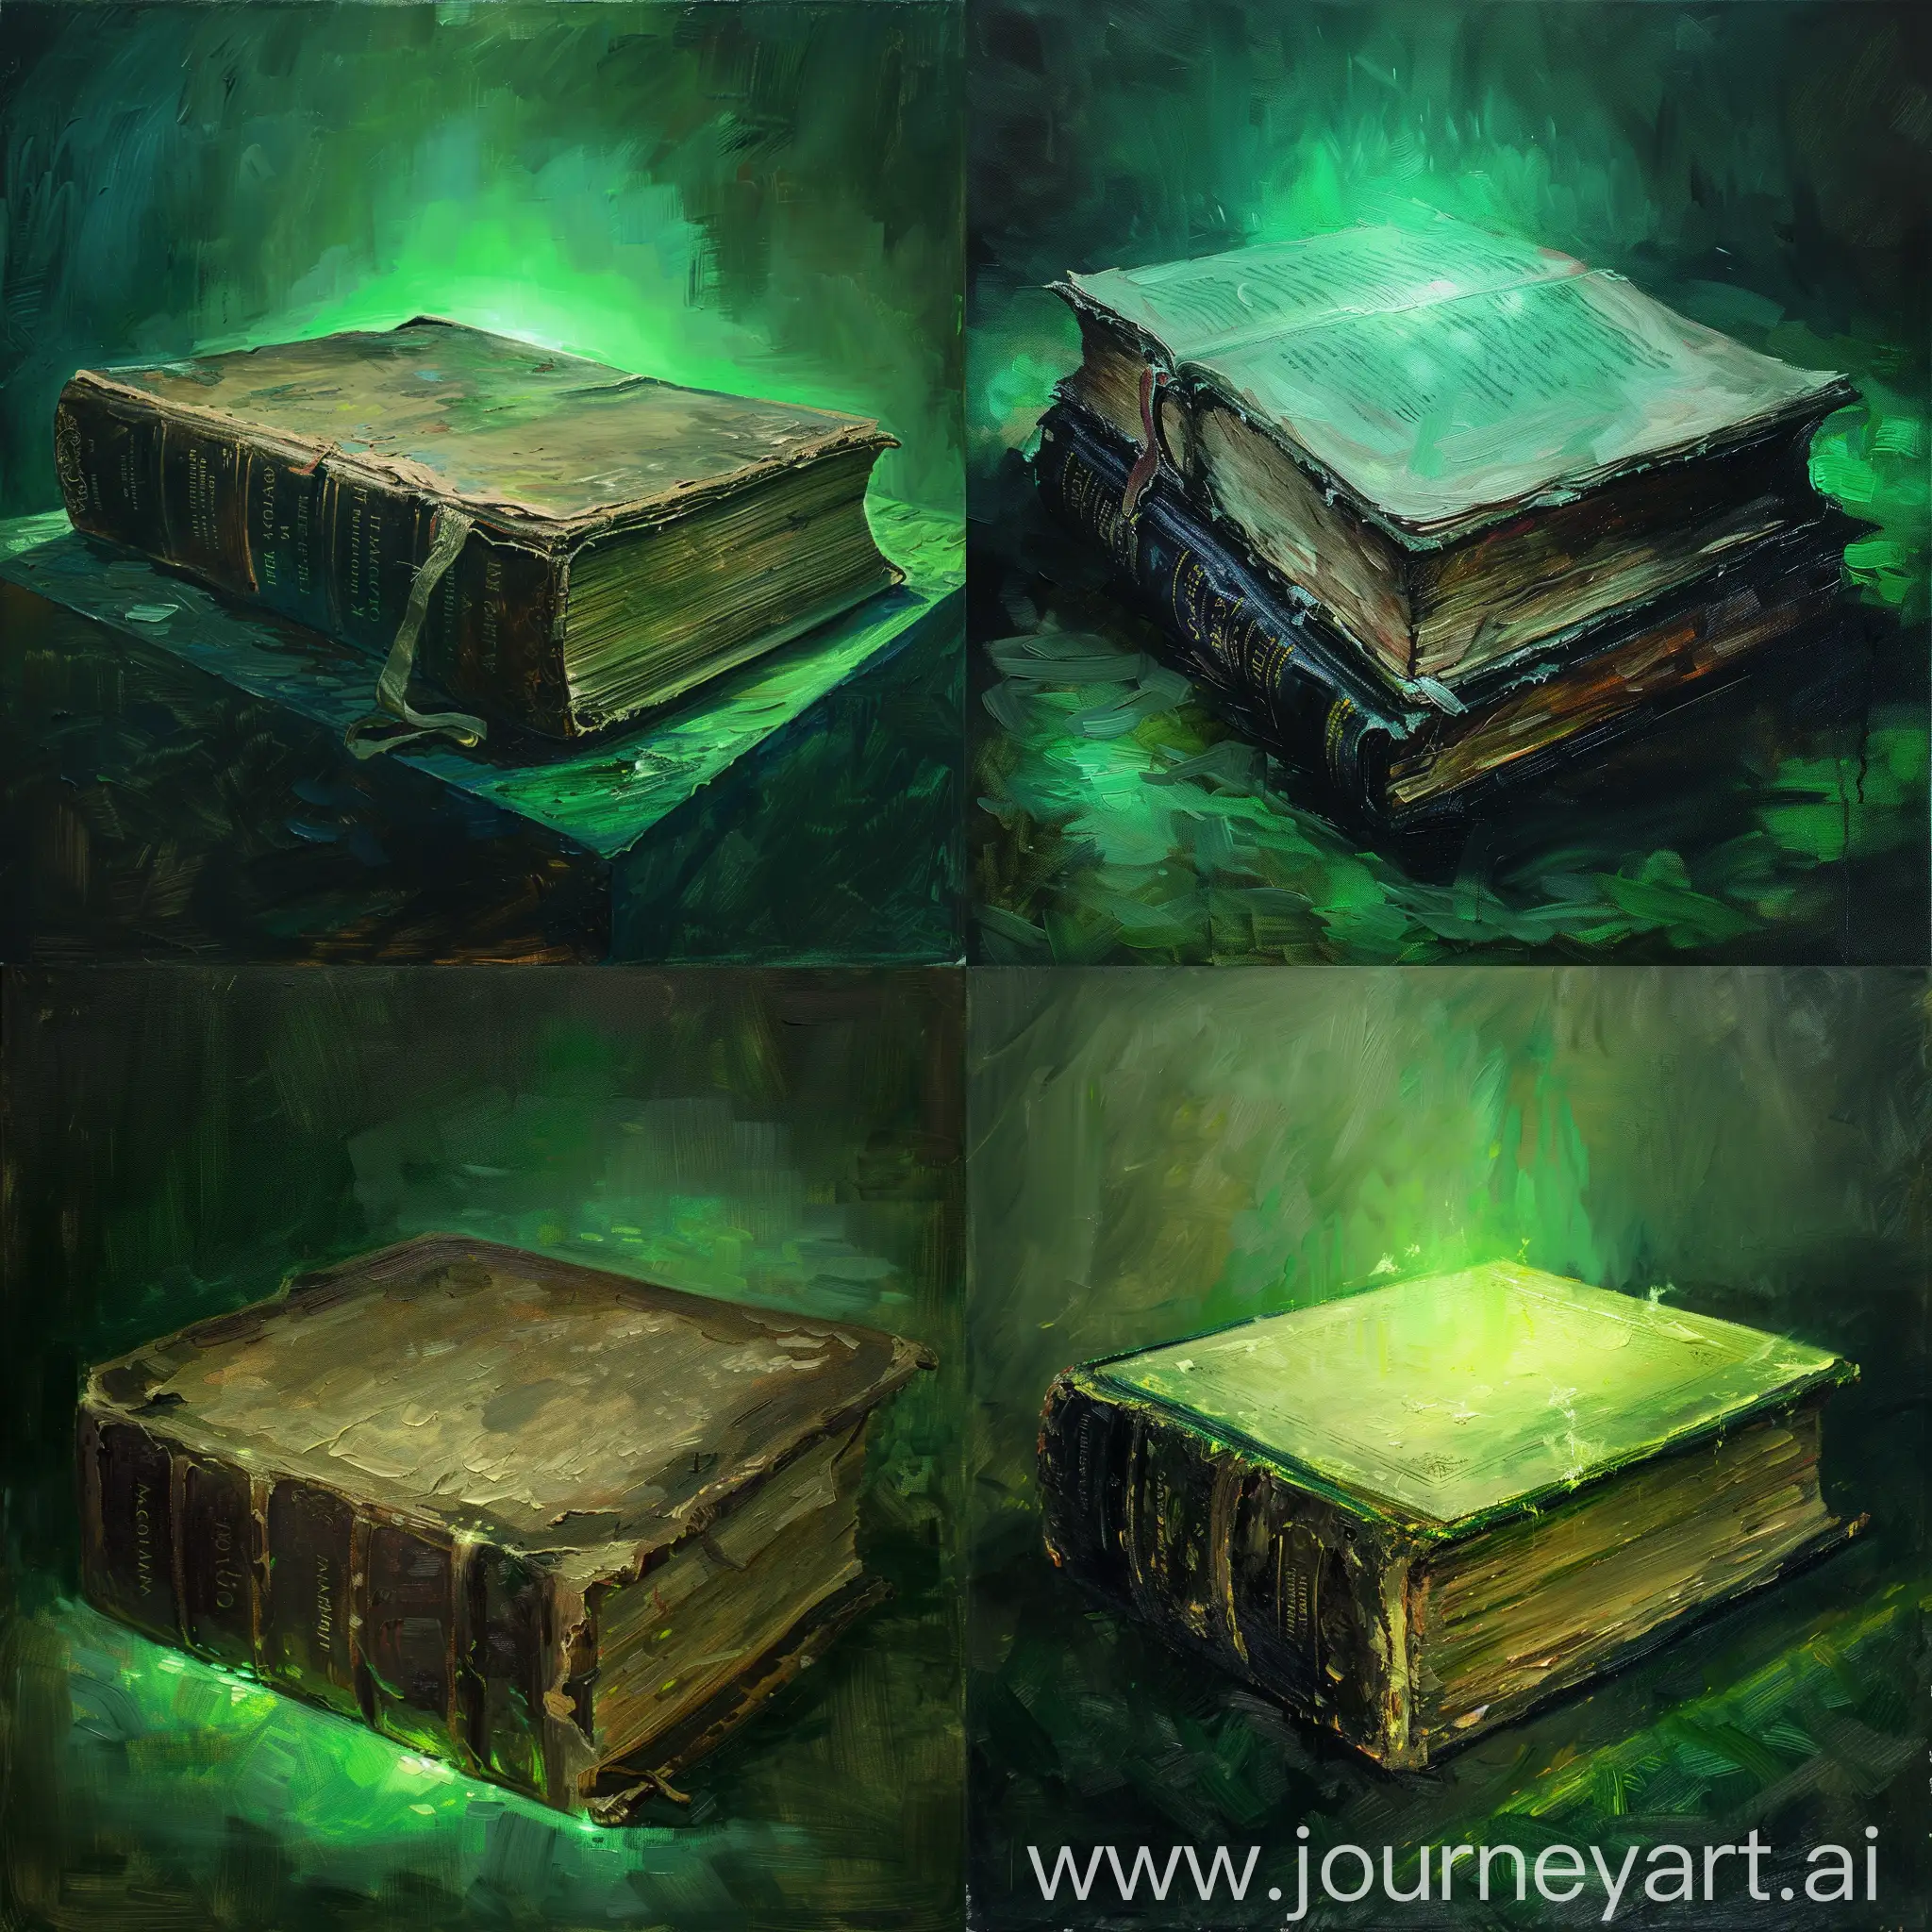 Vintage-Book-Illuminated-by-Green-Light-Muted-Colors-Oil-Painting